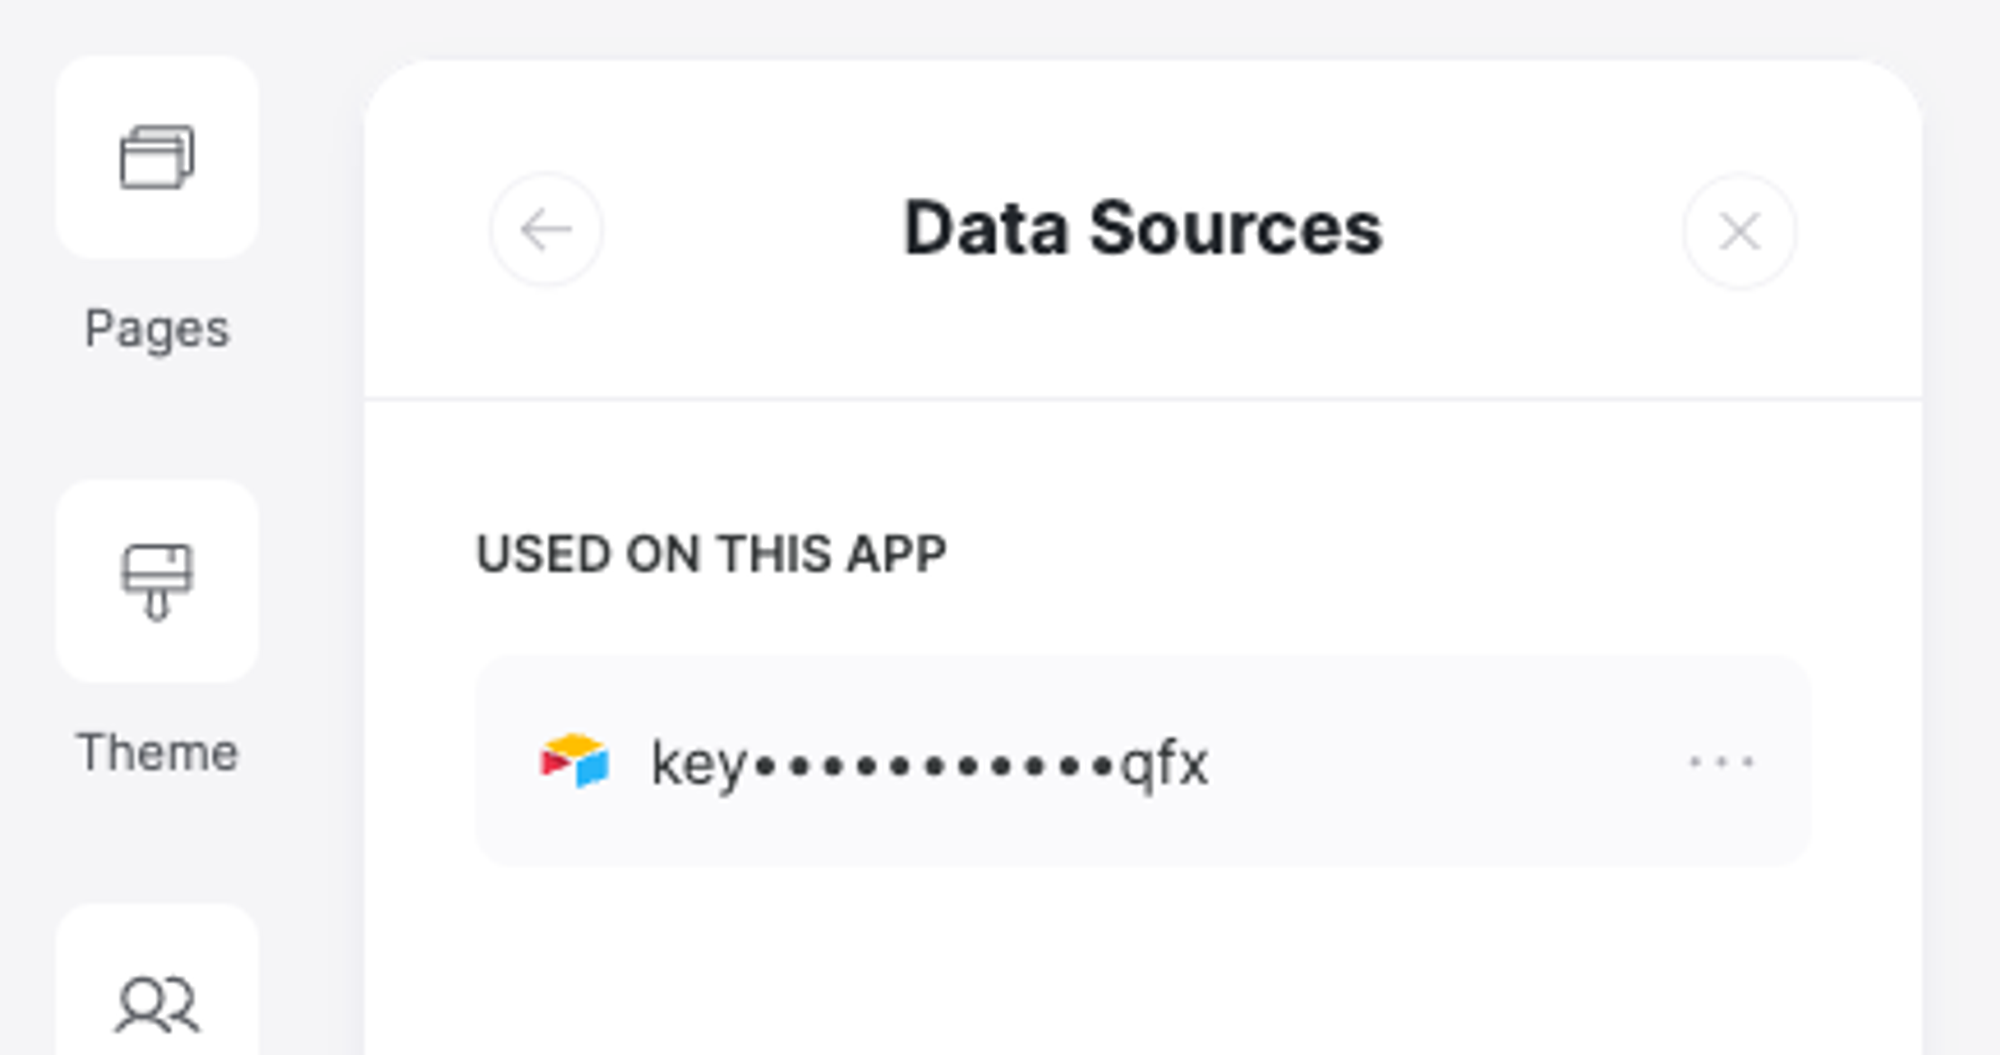 Data Sources in app settings